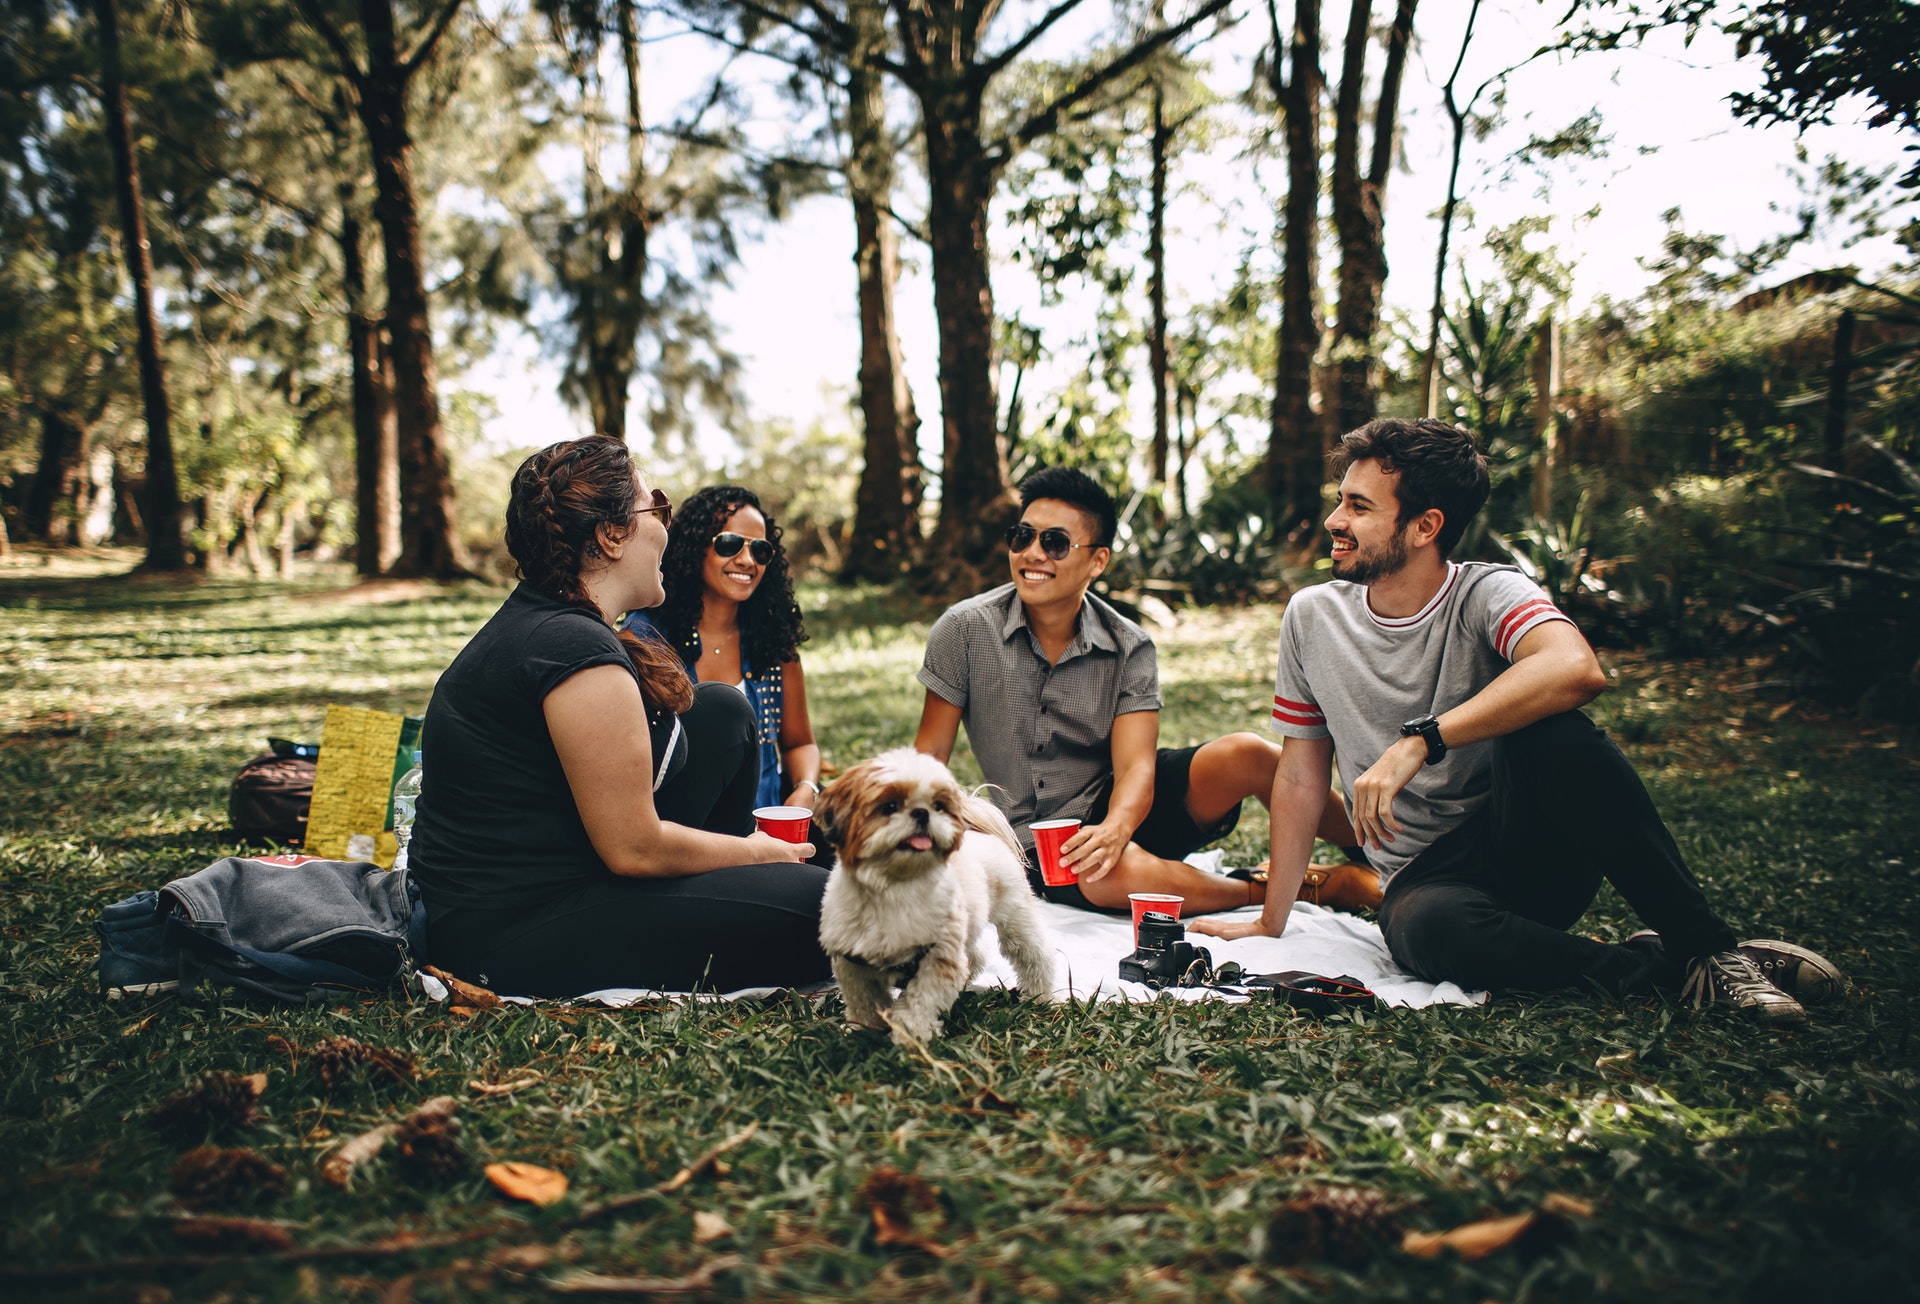 Man with dog at picnic because he knows how to choose a dog breed that suits him